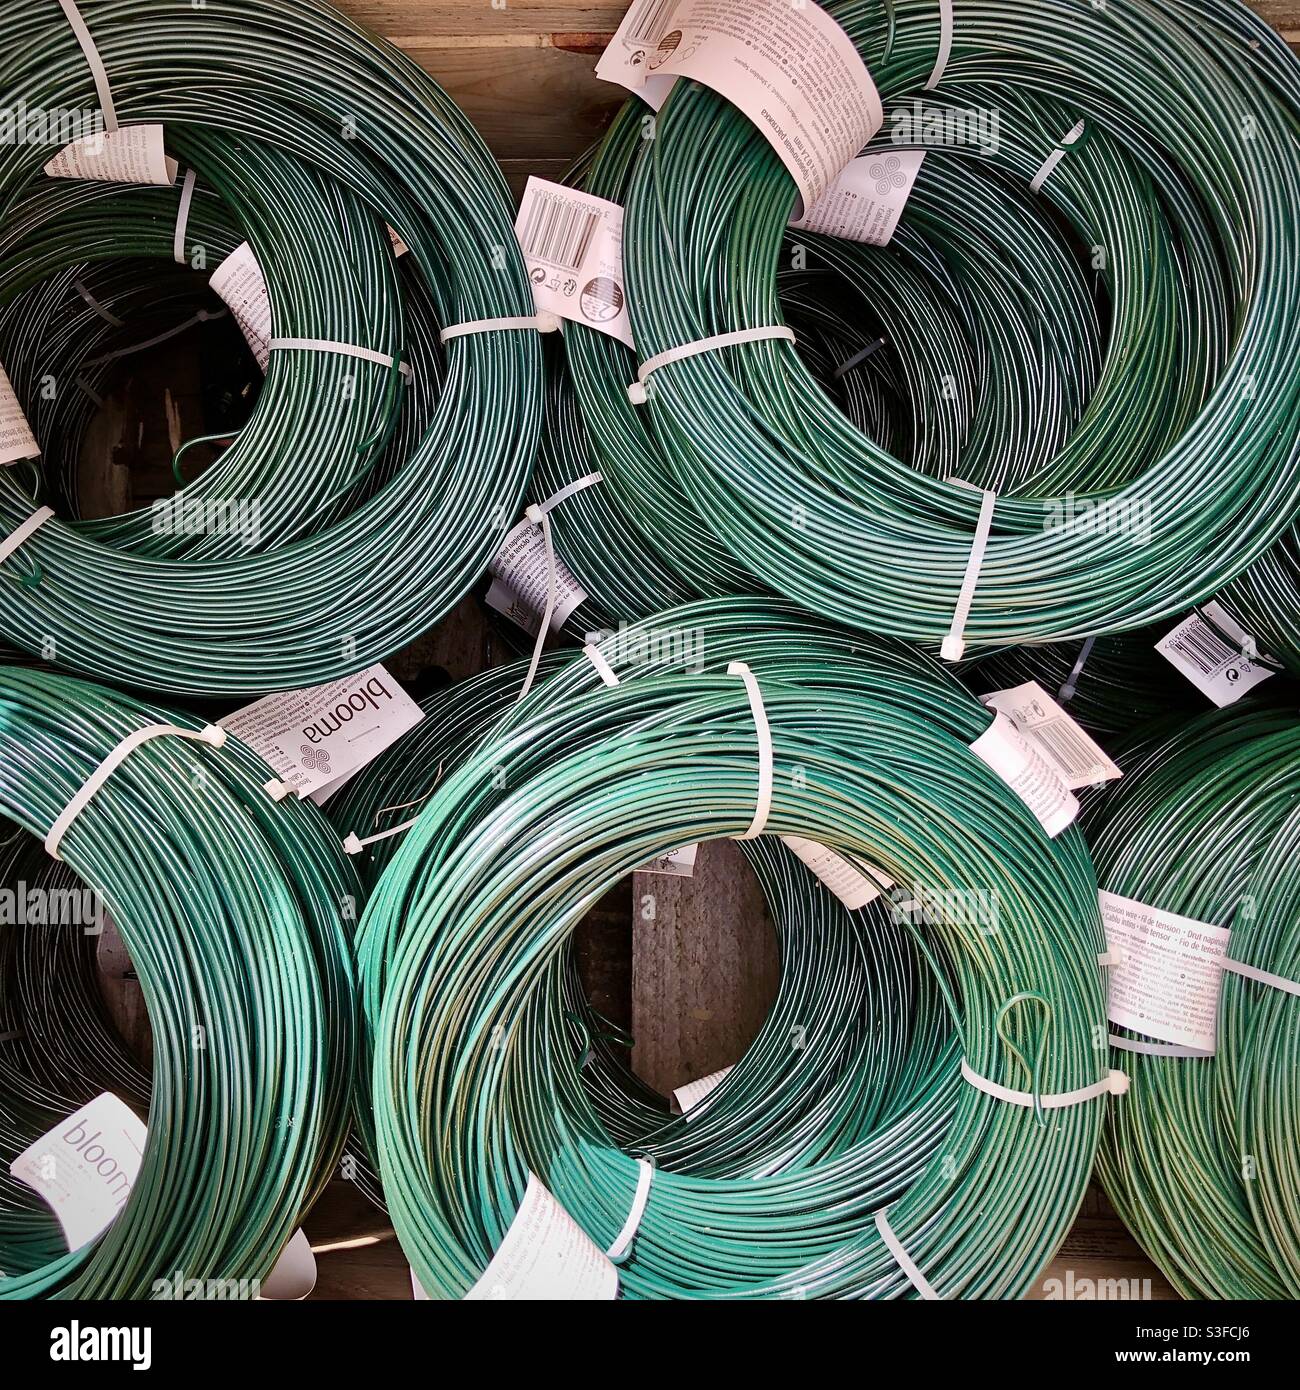 Display rack of rolls of plastic covered garden wire. Stock Photo